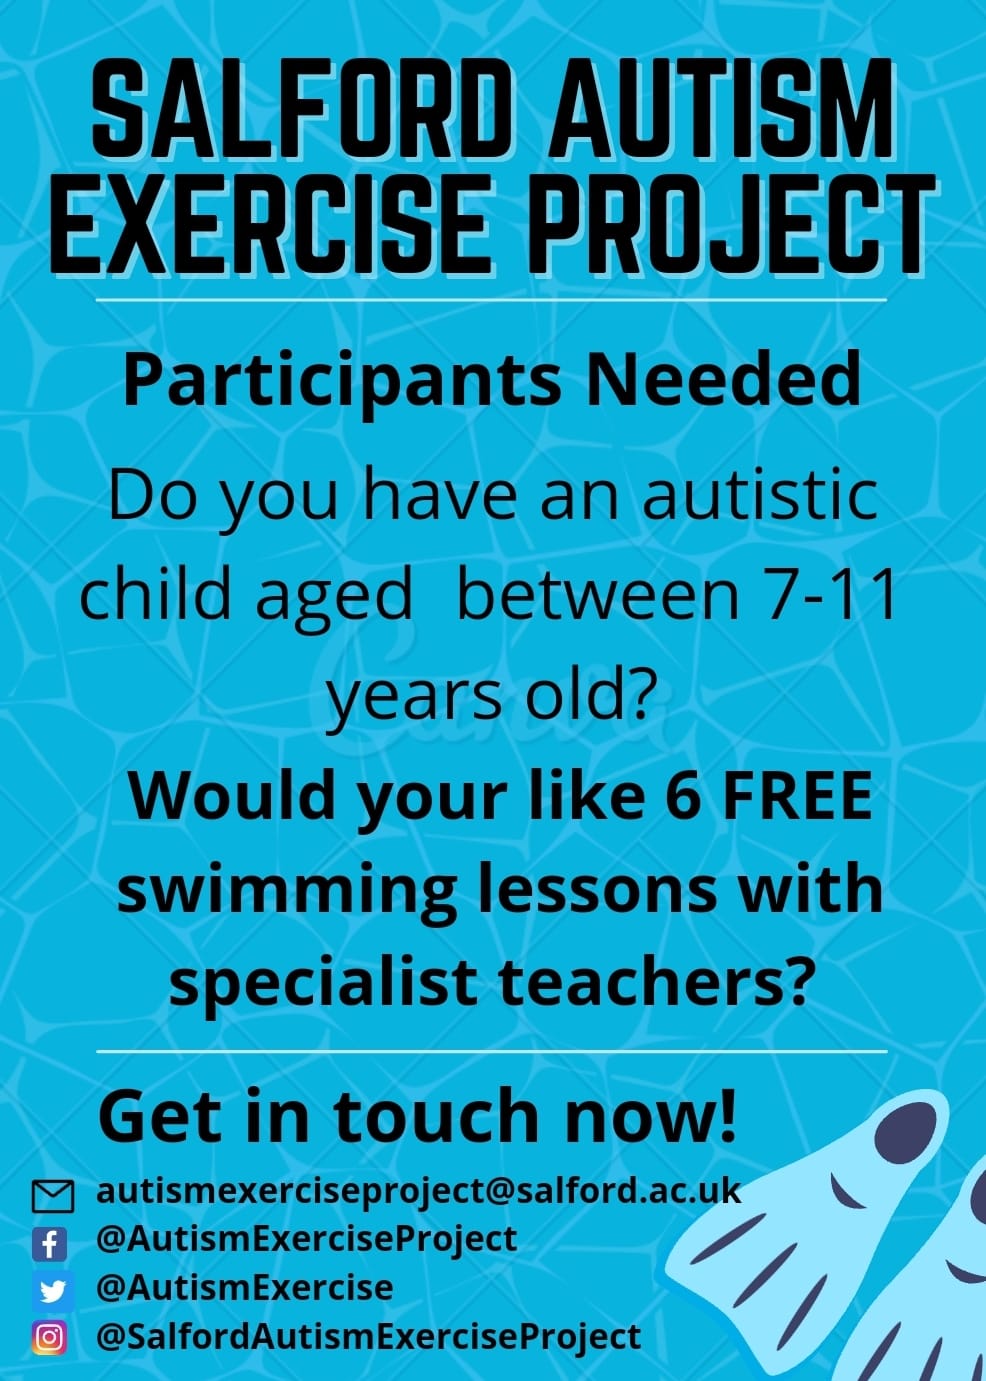 Flyer from the Salford Autism Exercise Project, calling for participants. The background is an illustration of light blue swimming pool water.